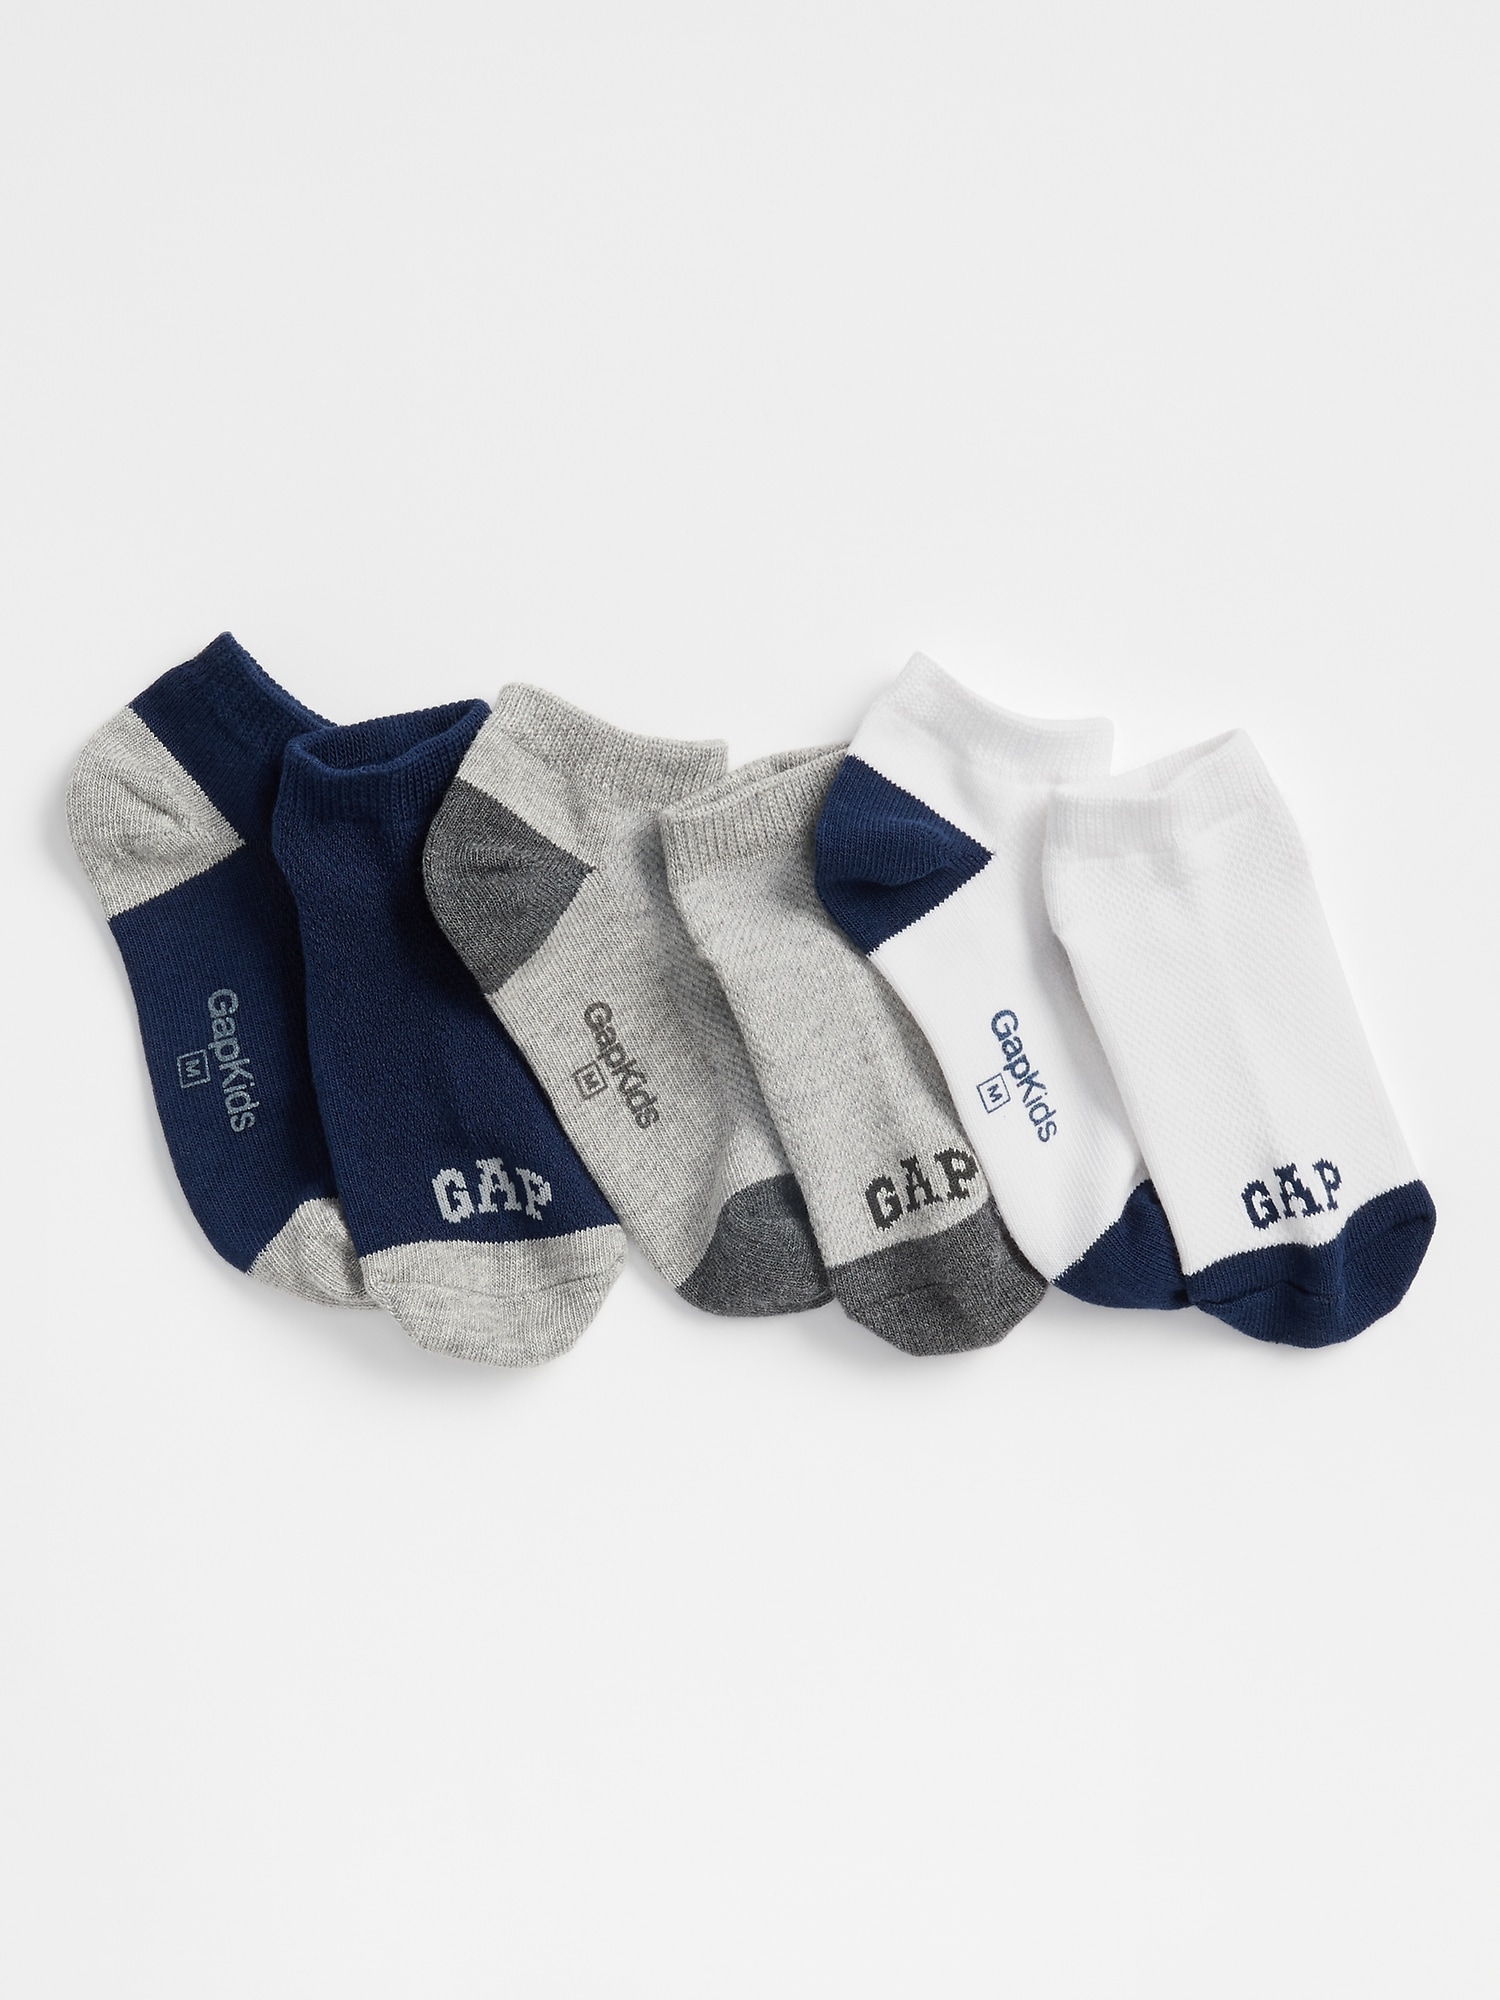 Details about   Lot of 3 Pair Gap Boys Socks Logo Crew Toddler Athletic White 2-3 yrs 